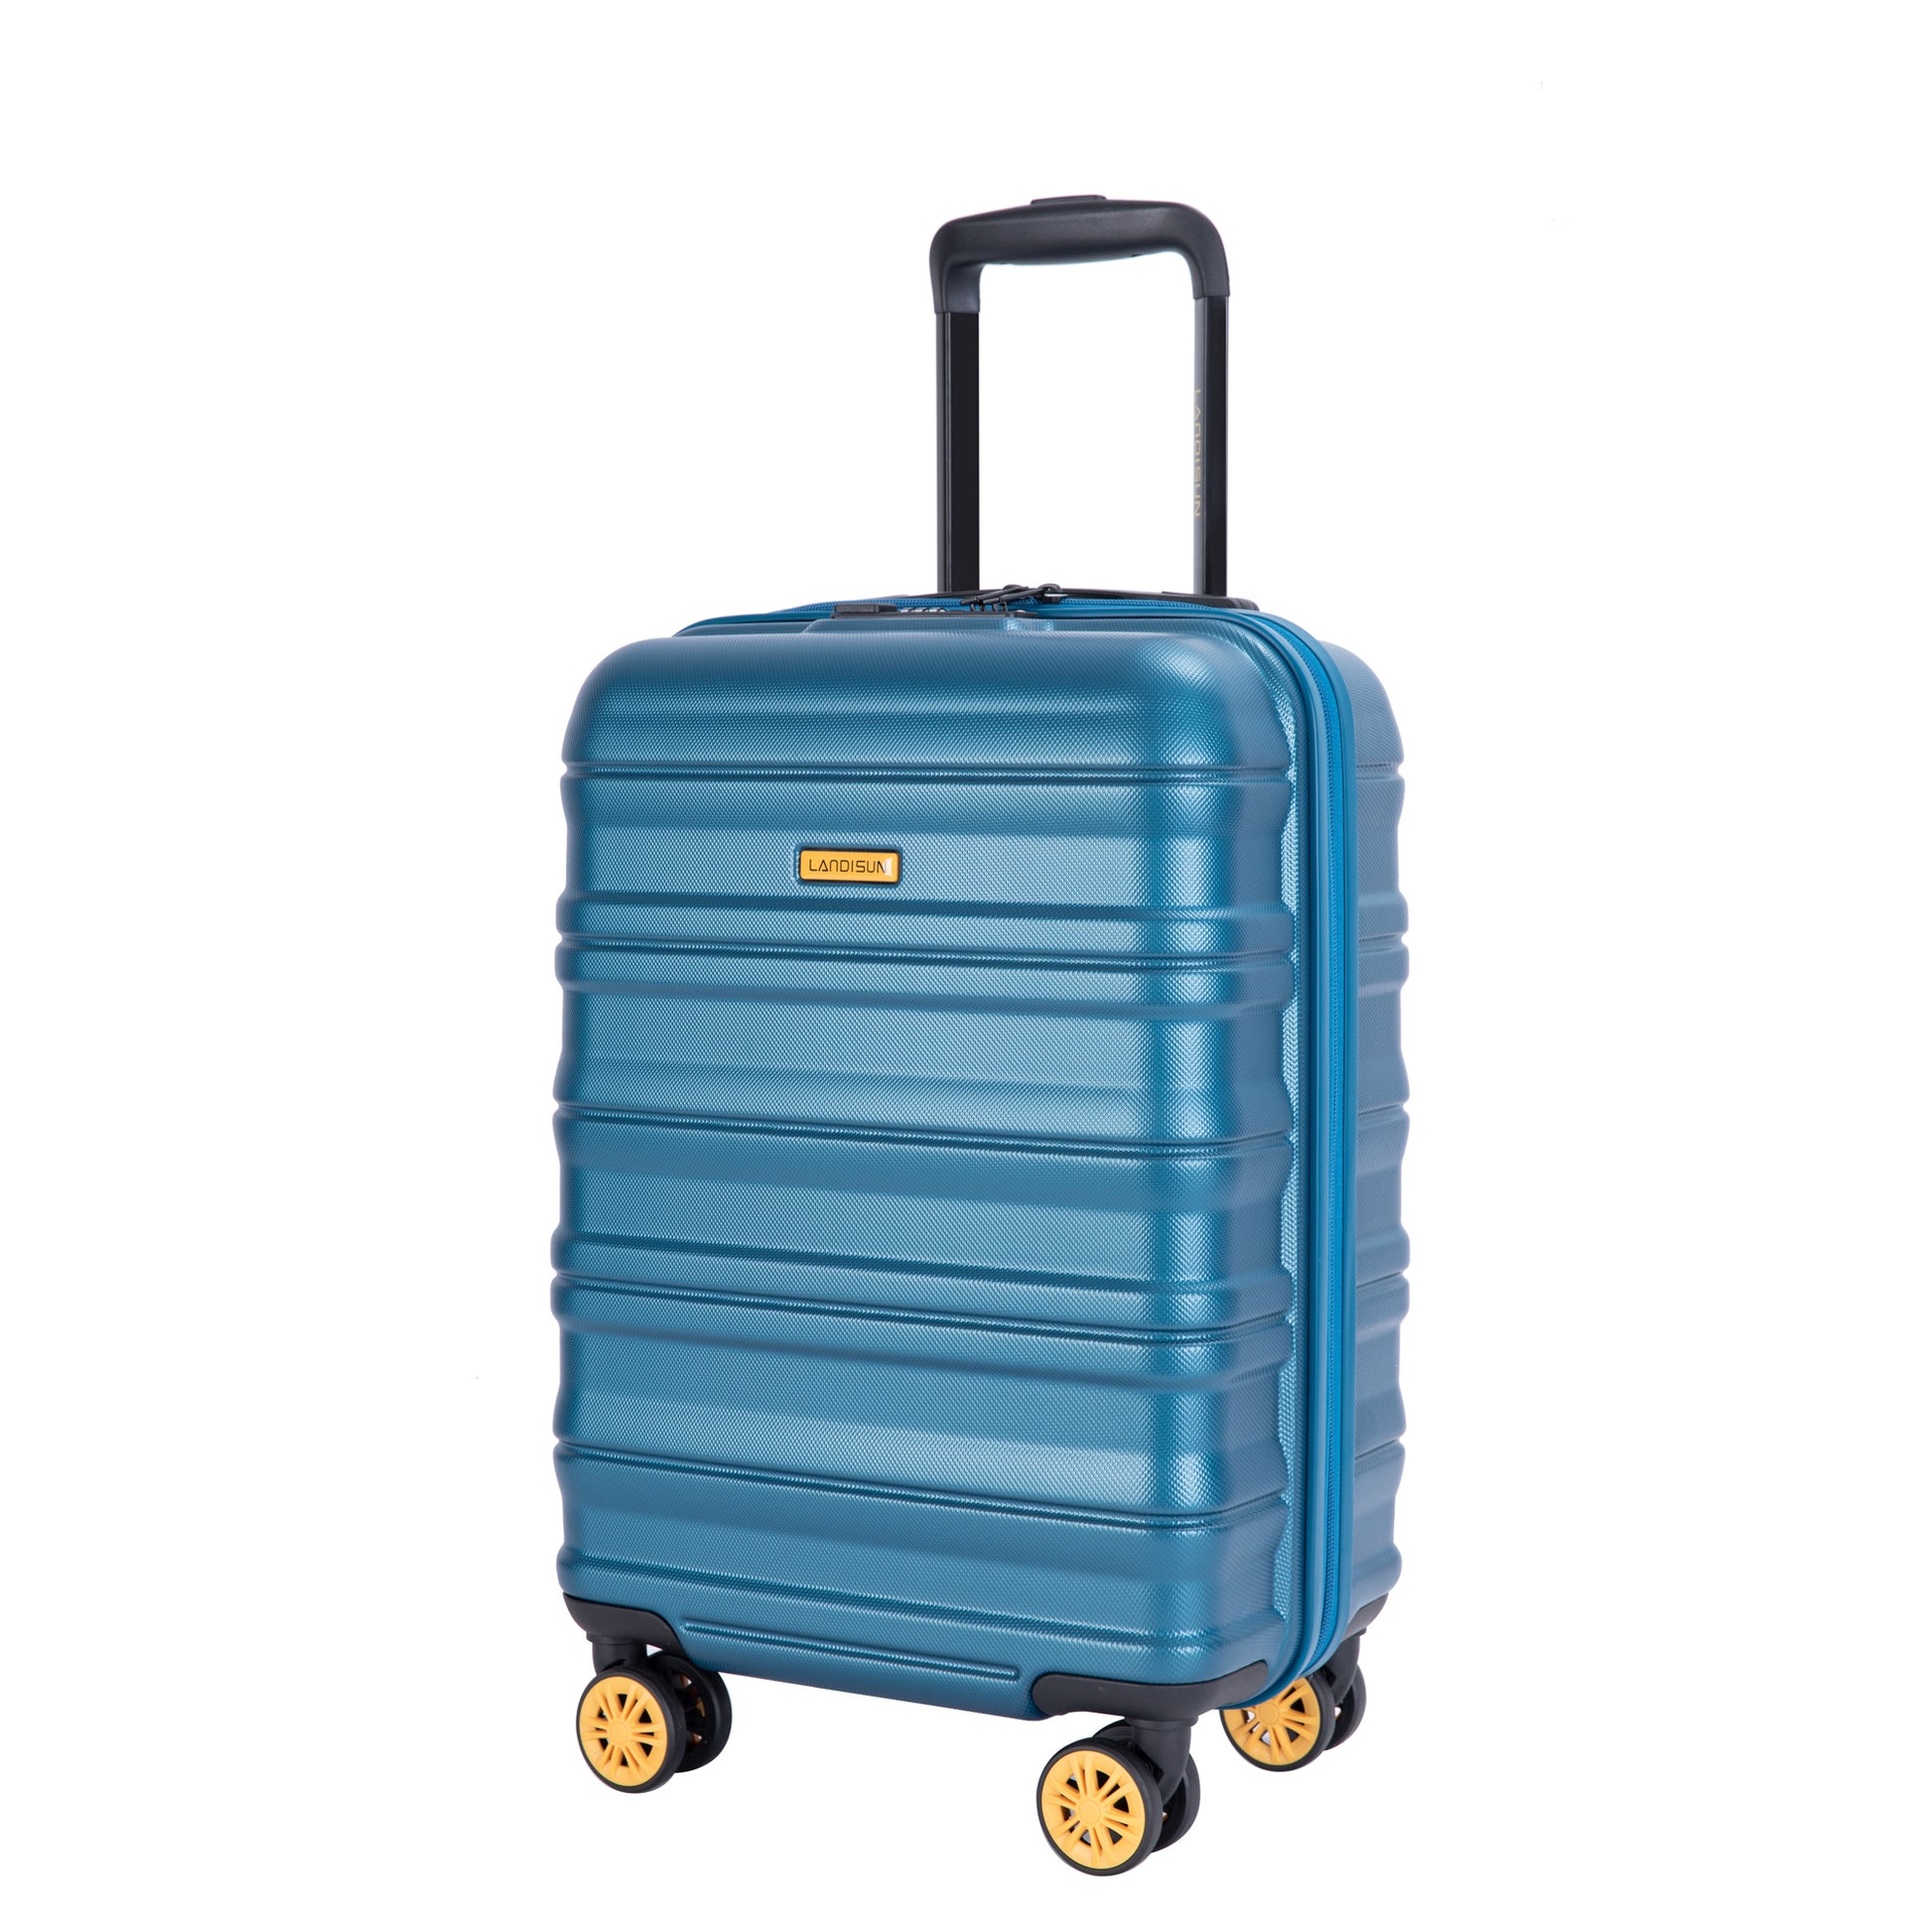 Carry On Luggage Airline Approved18.5" Carry On blue-abs+pc